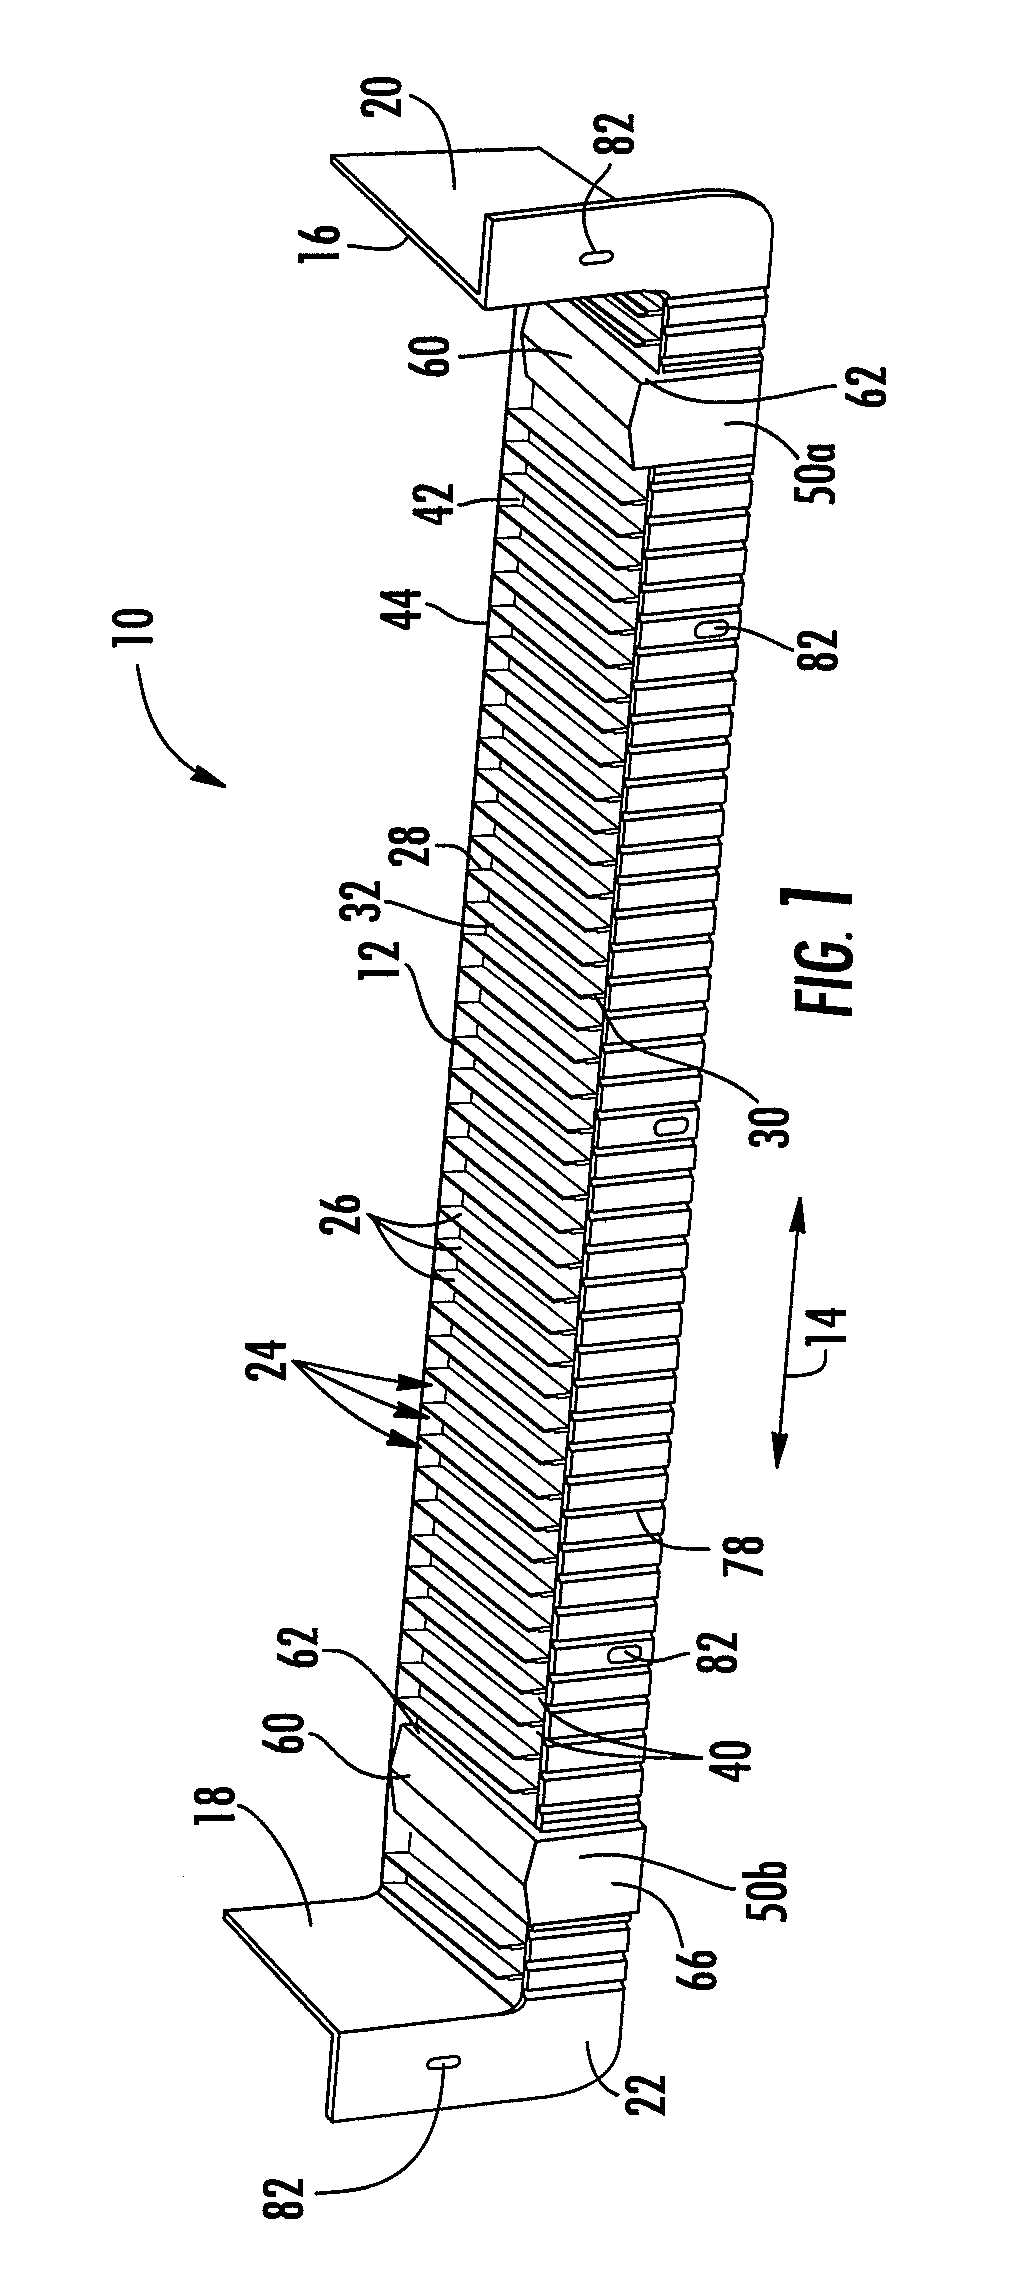 Sill flashing and associated method